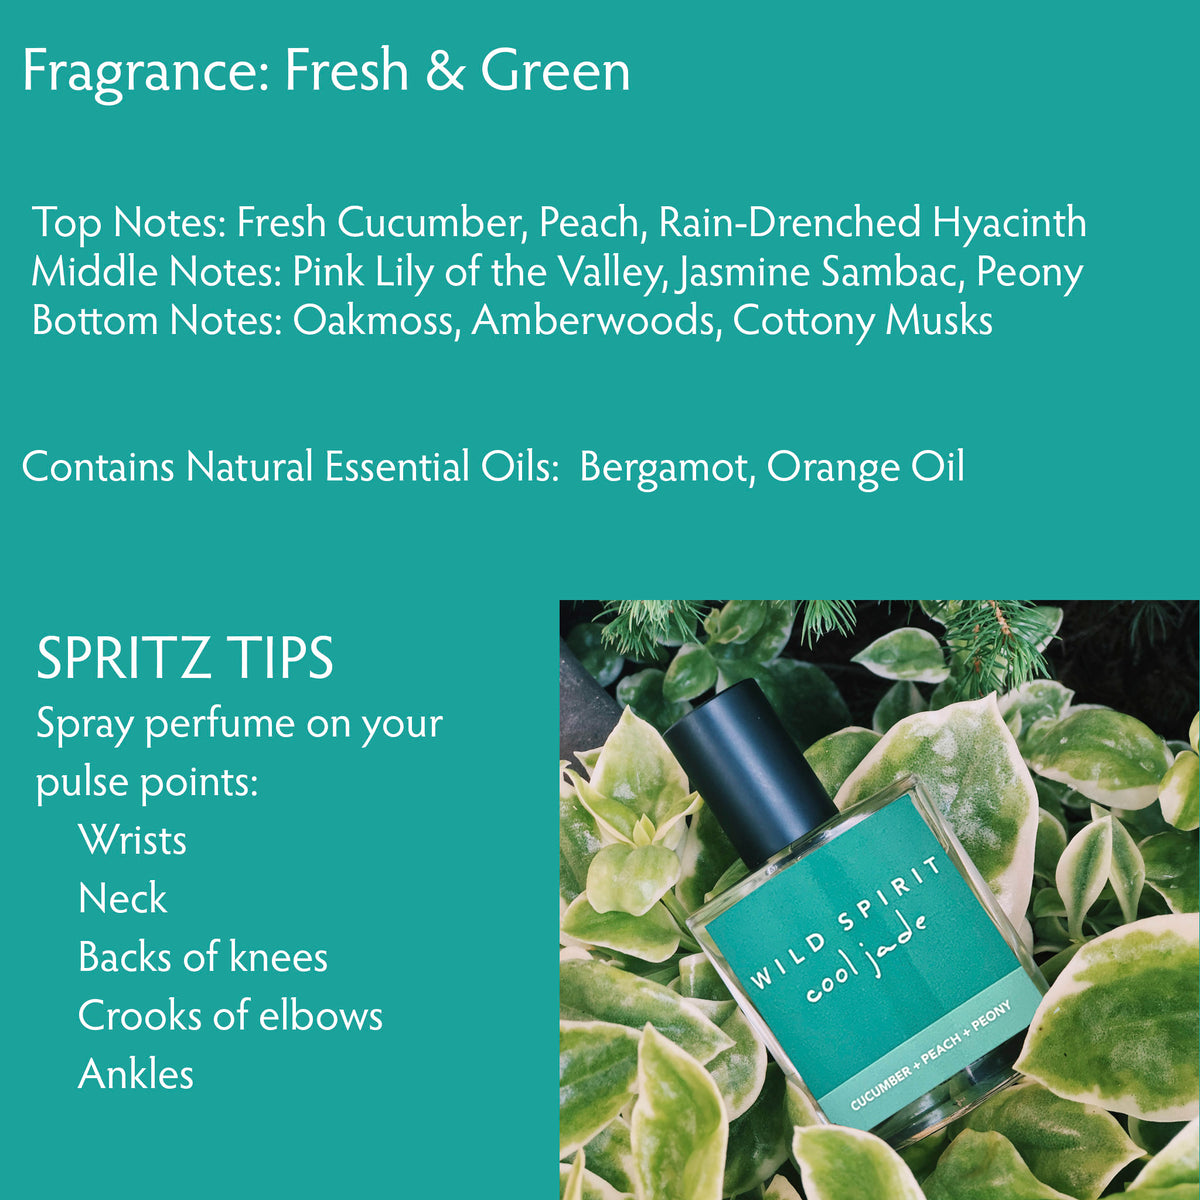 Cool Jade: Top Notes: Fresh Cucumber, Peach, Rain-Drenched Hyacinth  Middle Notes: Pink Lily of the Valley, Jasmine Sambac, Peony  Bottom Notes: Oakmoss, Amberwoods, Cottony Musks